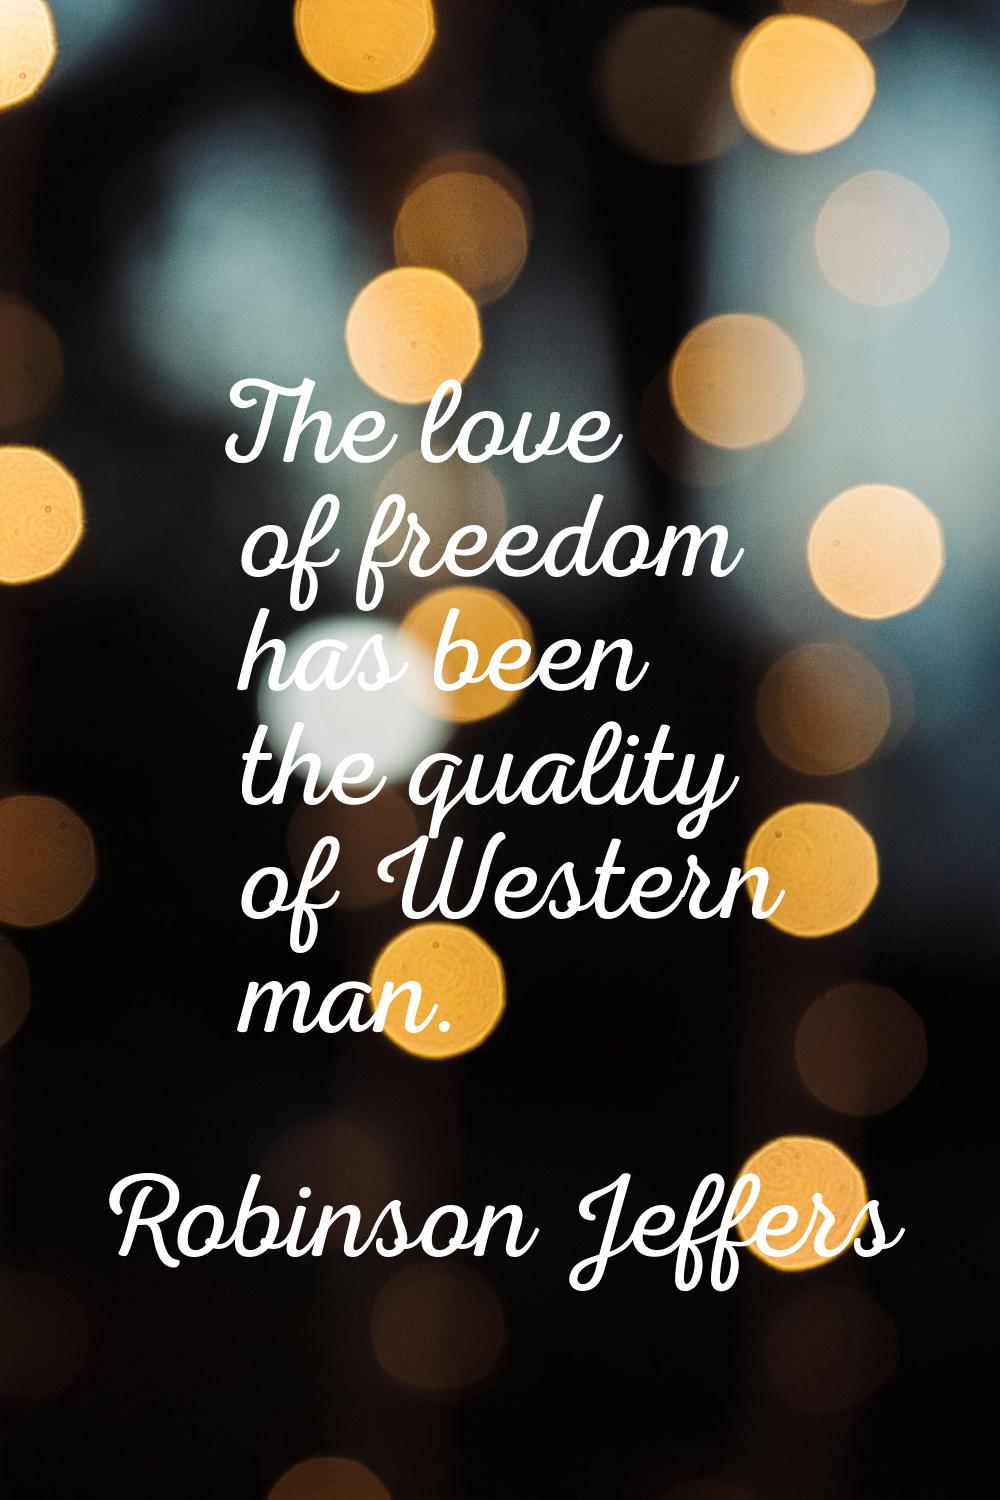 The love of freedom has been the quality of Western man.